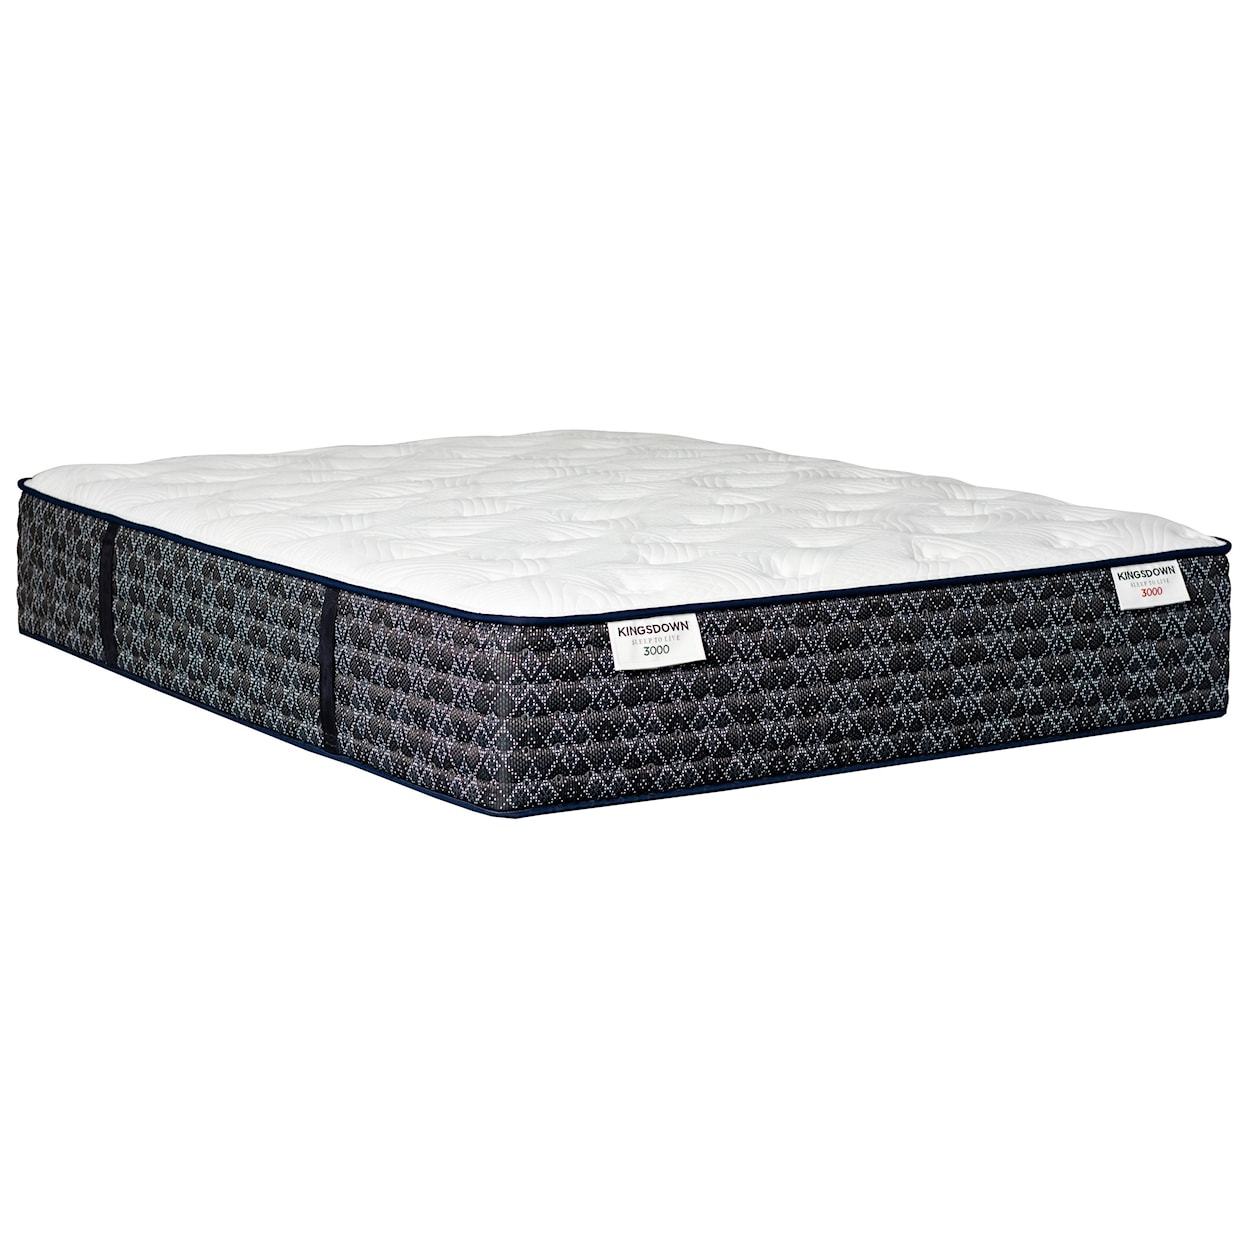 Kingsdown Sleep to Live 3000 Green Red Queen Pocketed Coil Mattress